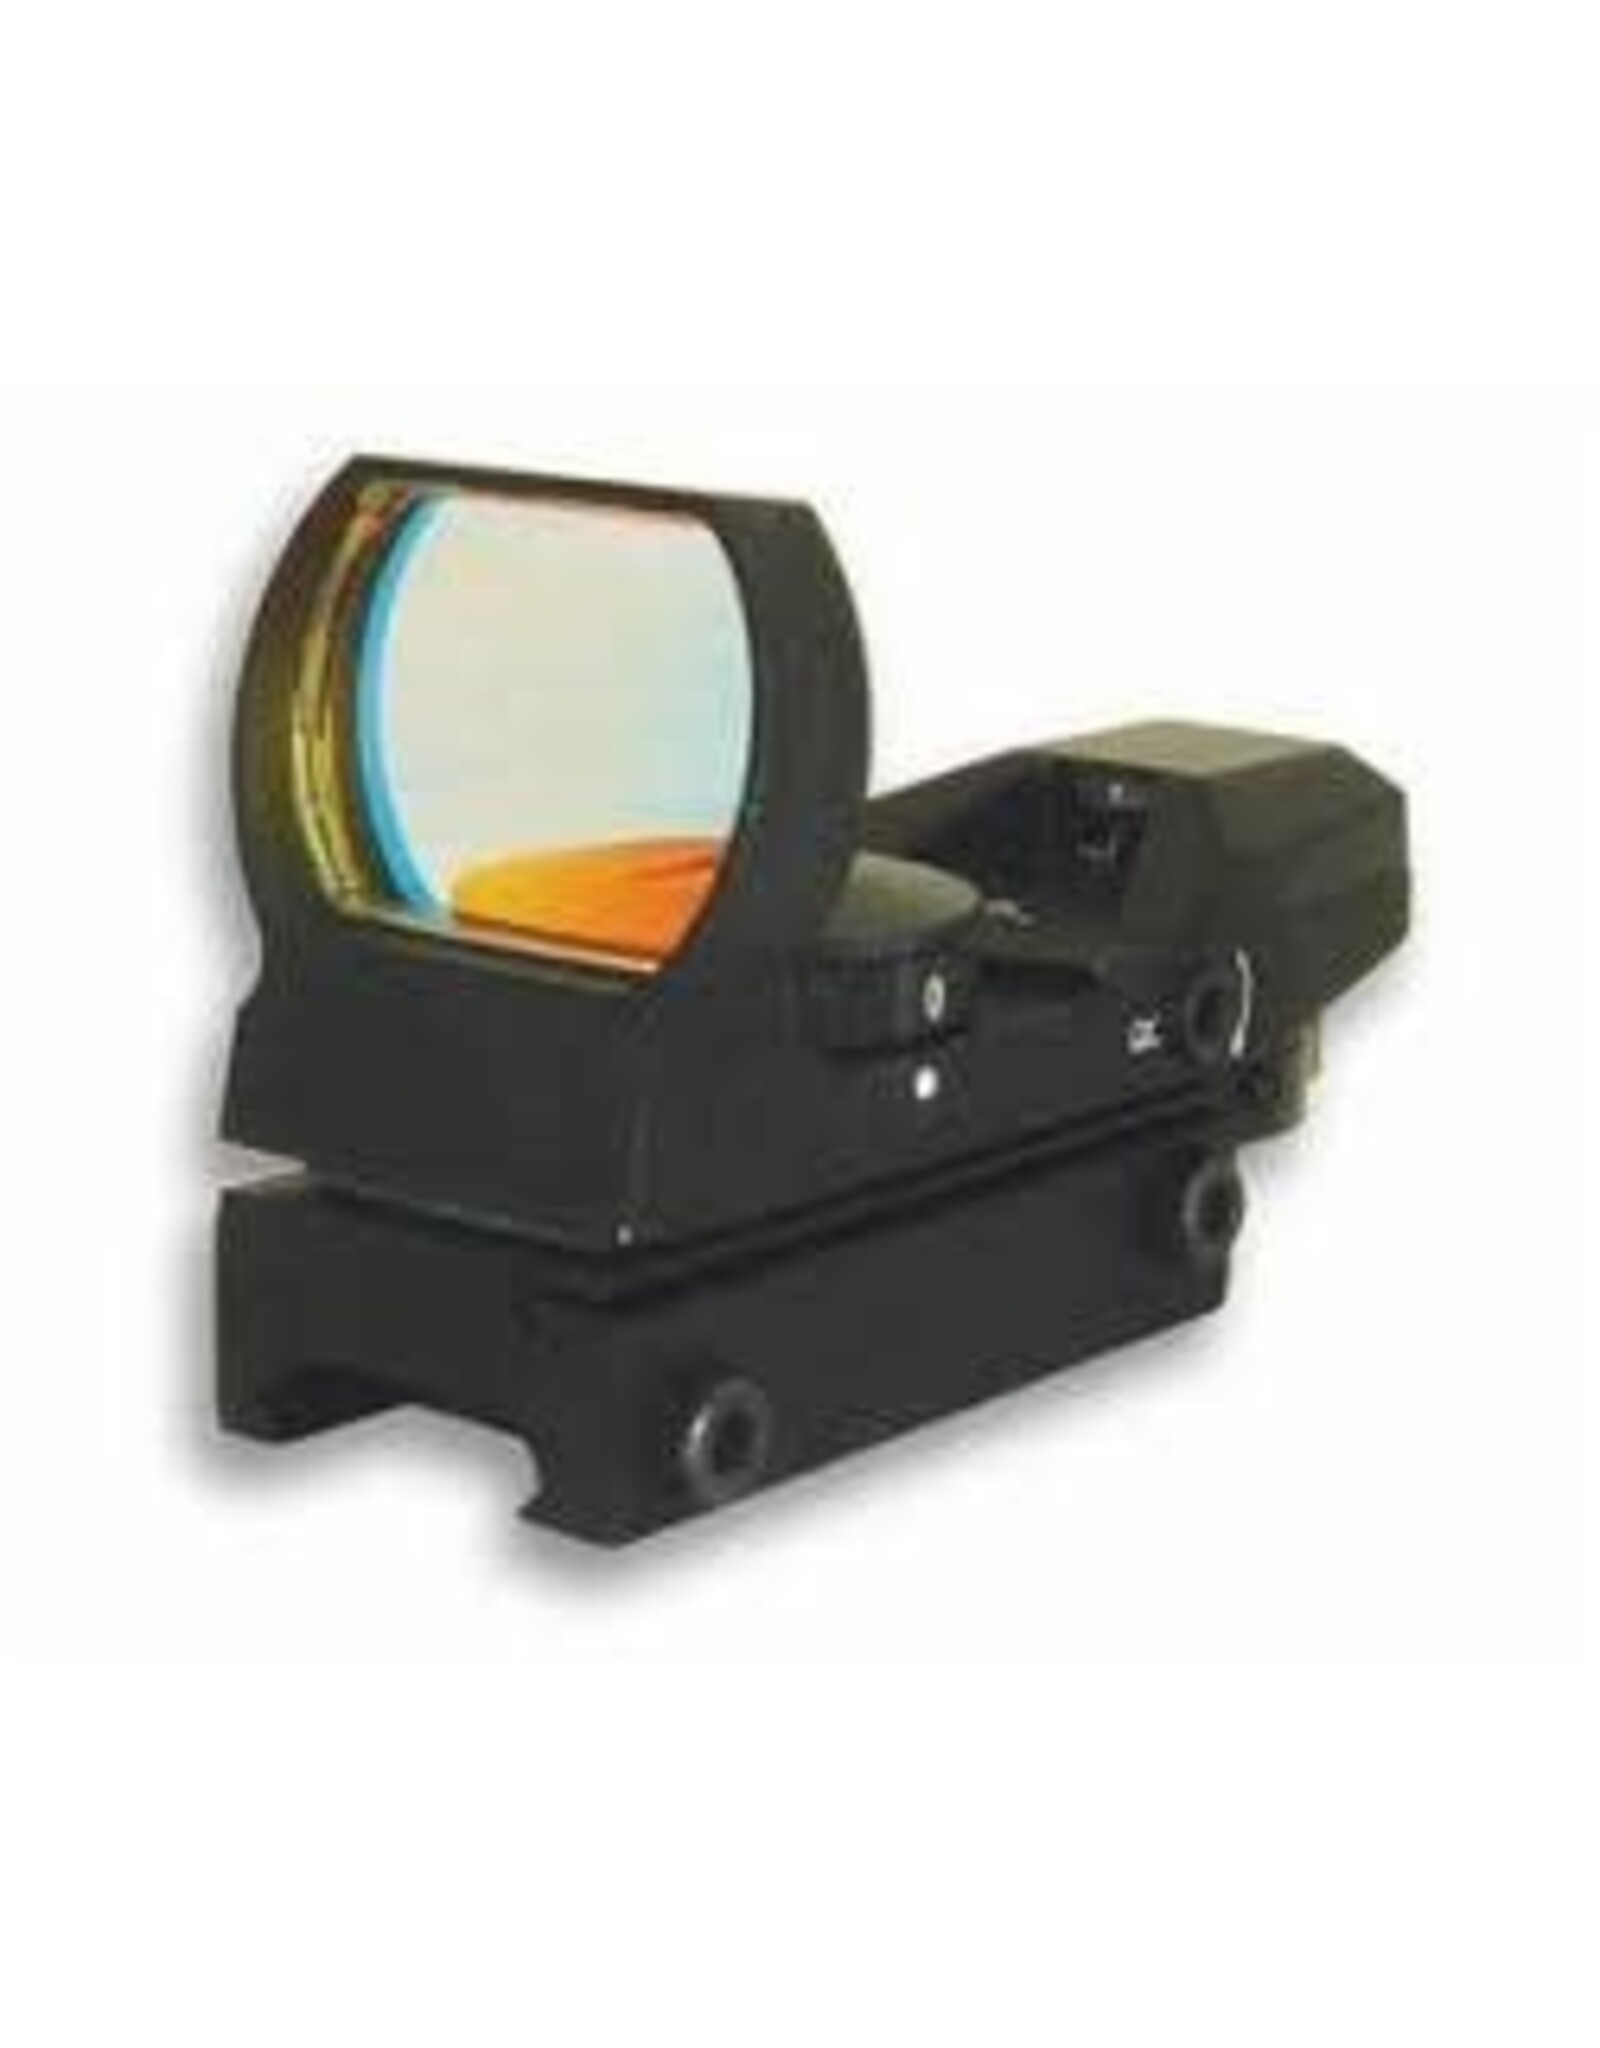 Elite Force Axeon R47 4-RS Multi-Reticle Red Dot Sight Reflex Scope